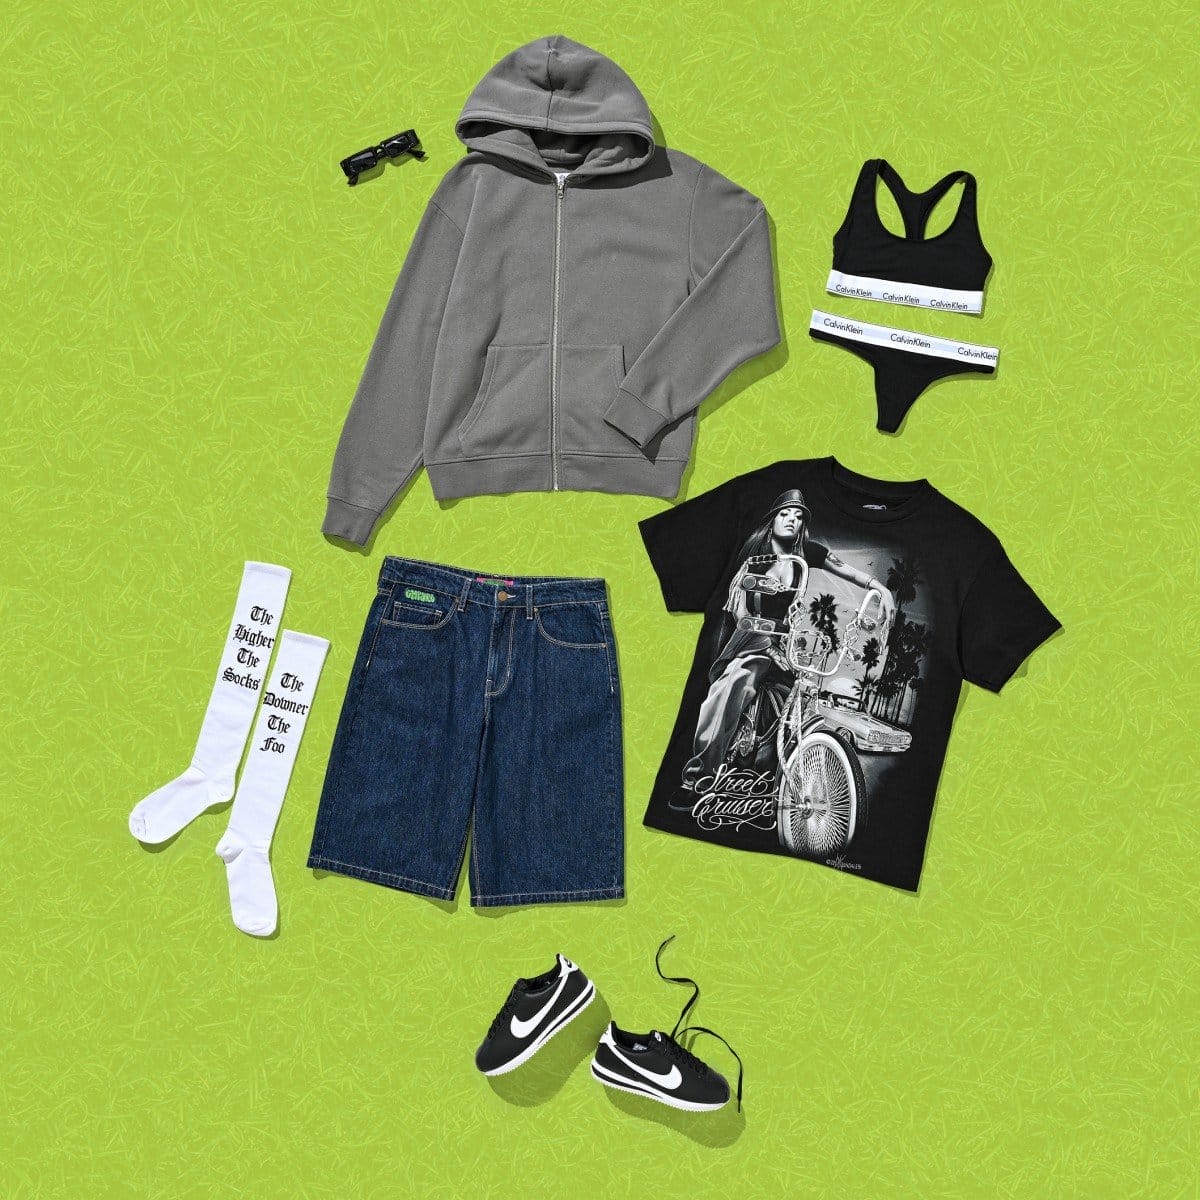 Check Out the Latest Spring Looks from Zumiez